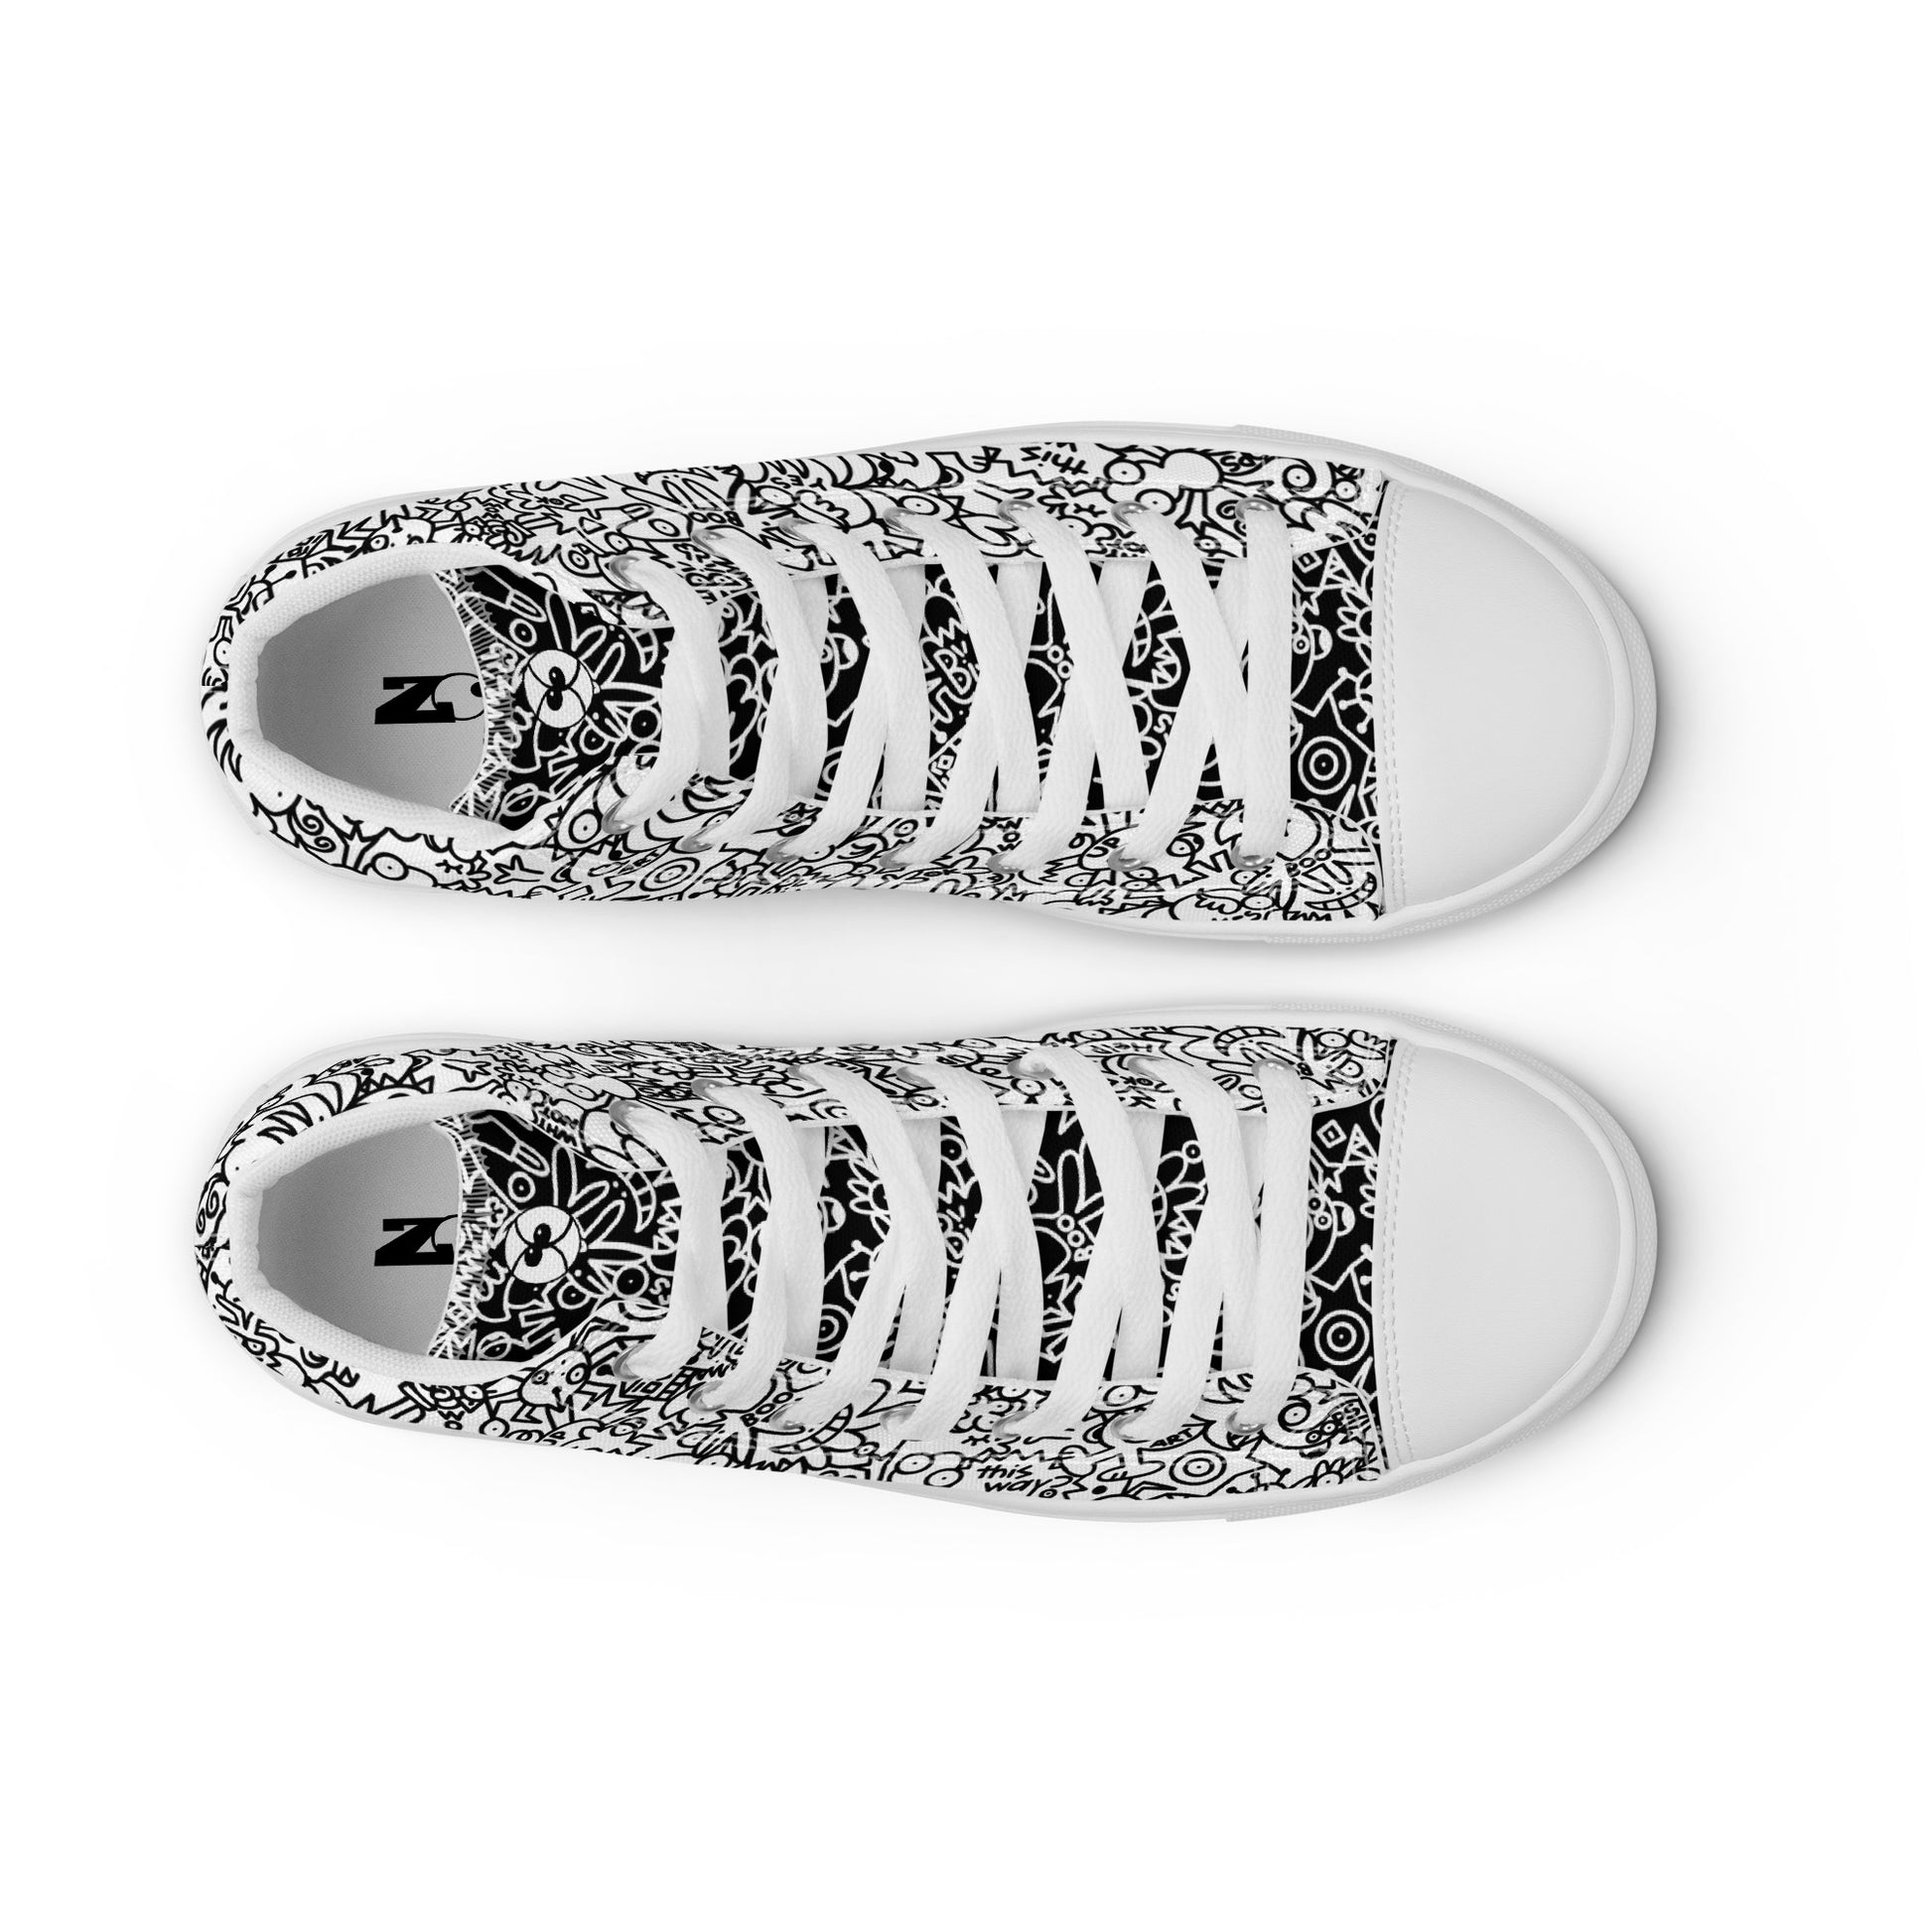 The Playful Power of Great Doodles for Bold People - Women’s high top canvas shoes. Top view